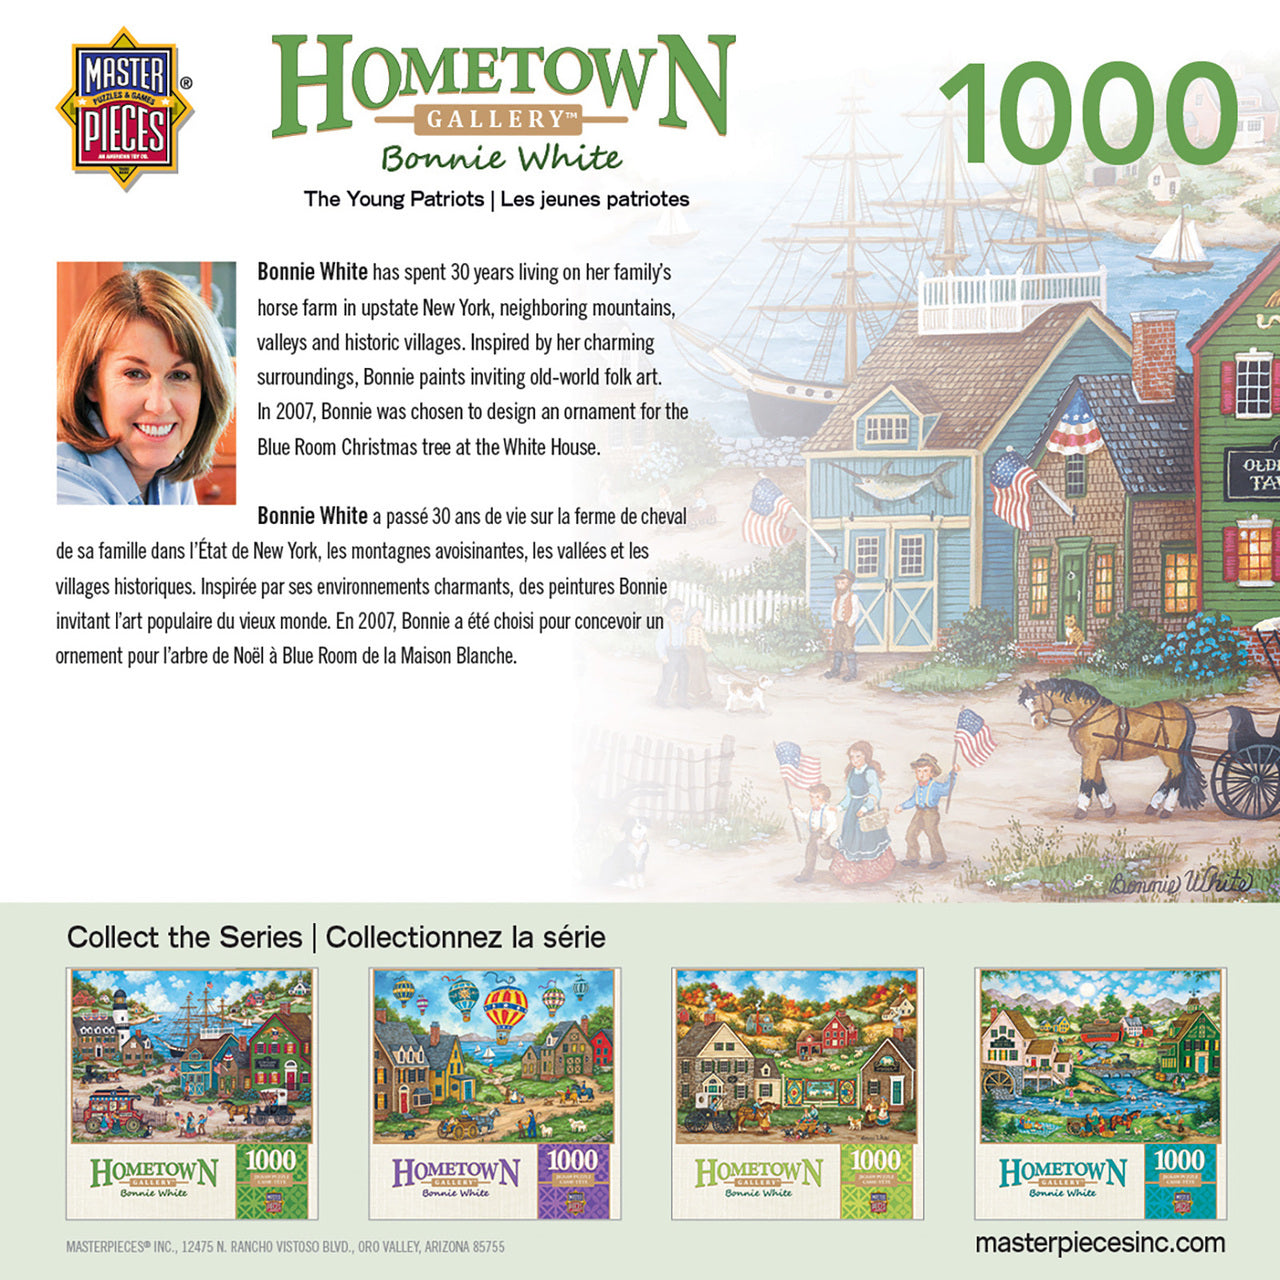 Hometown Gallery - The Young Patriots 1000 Piece Jigsaw Puzzle by Masterpieces